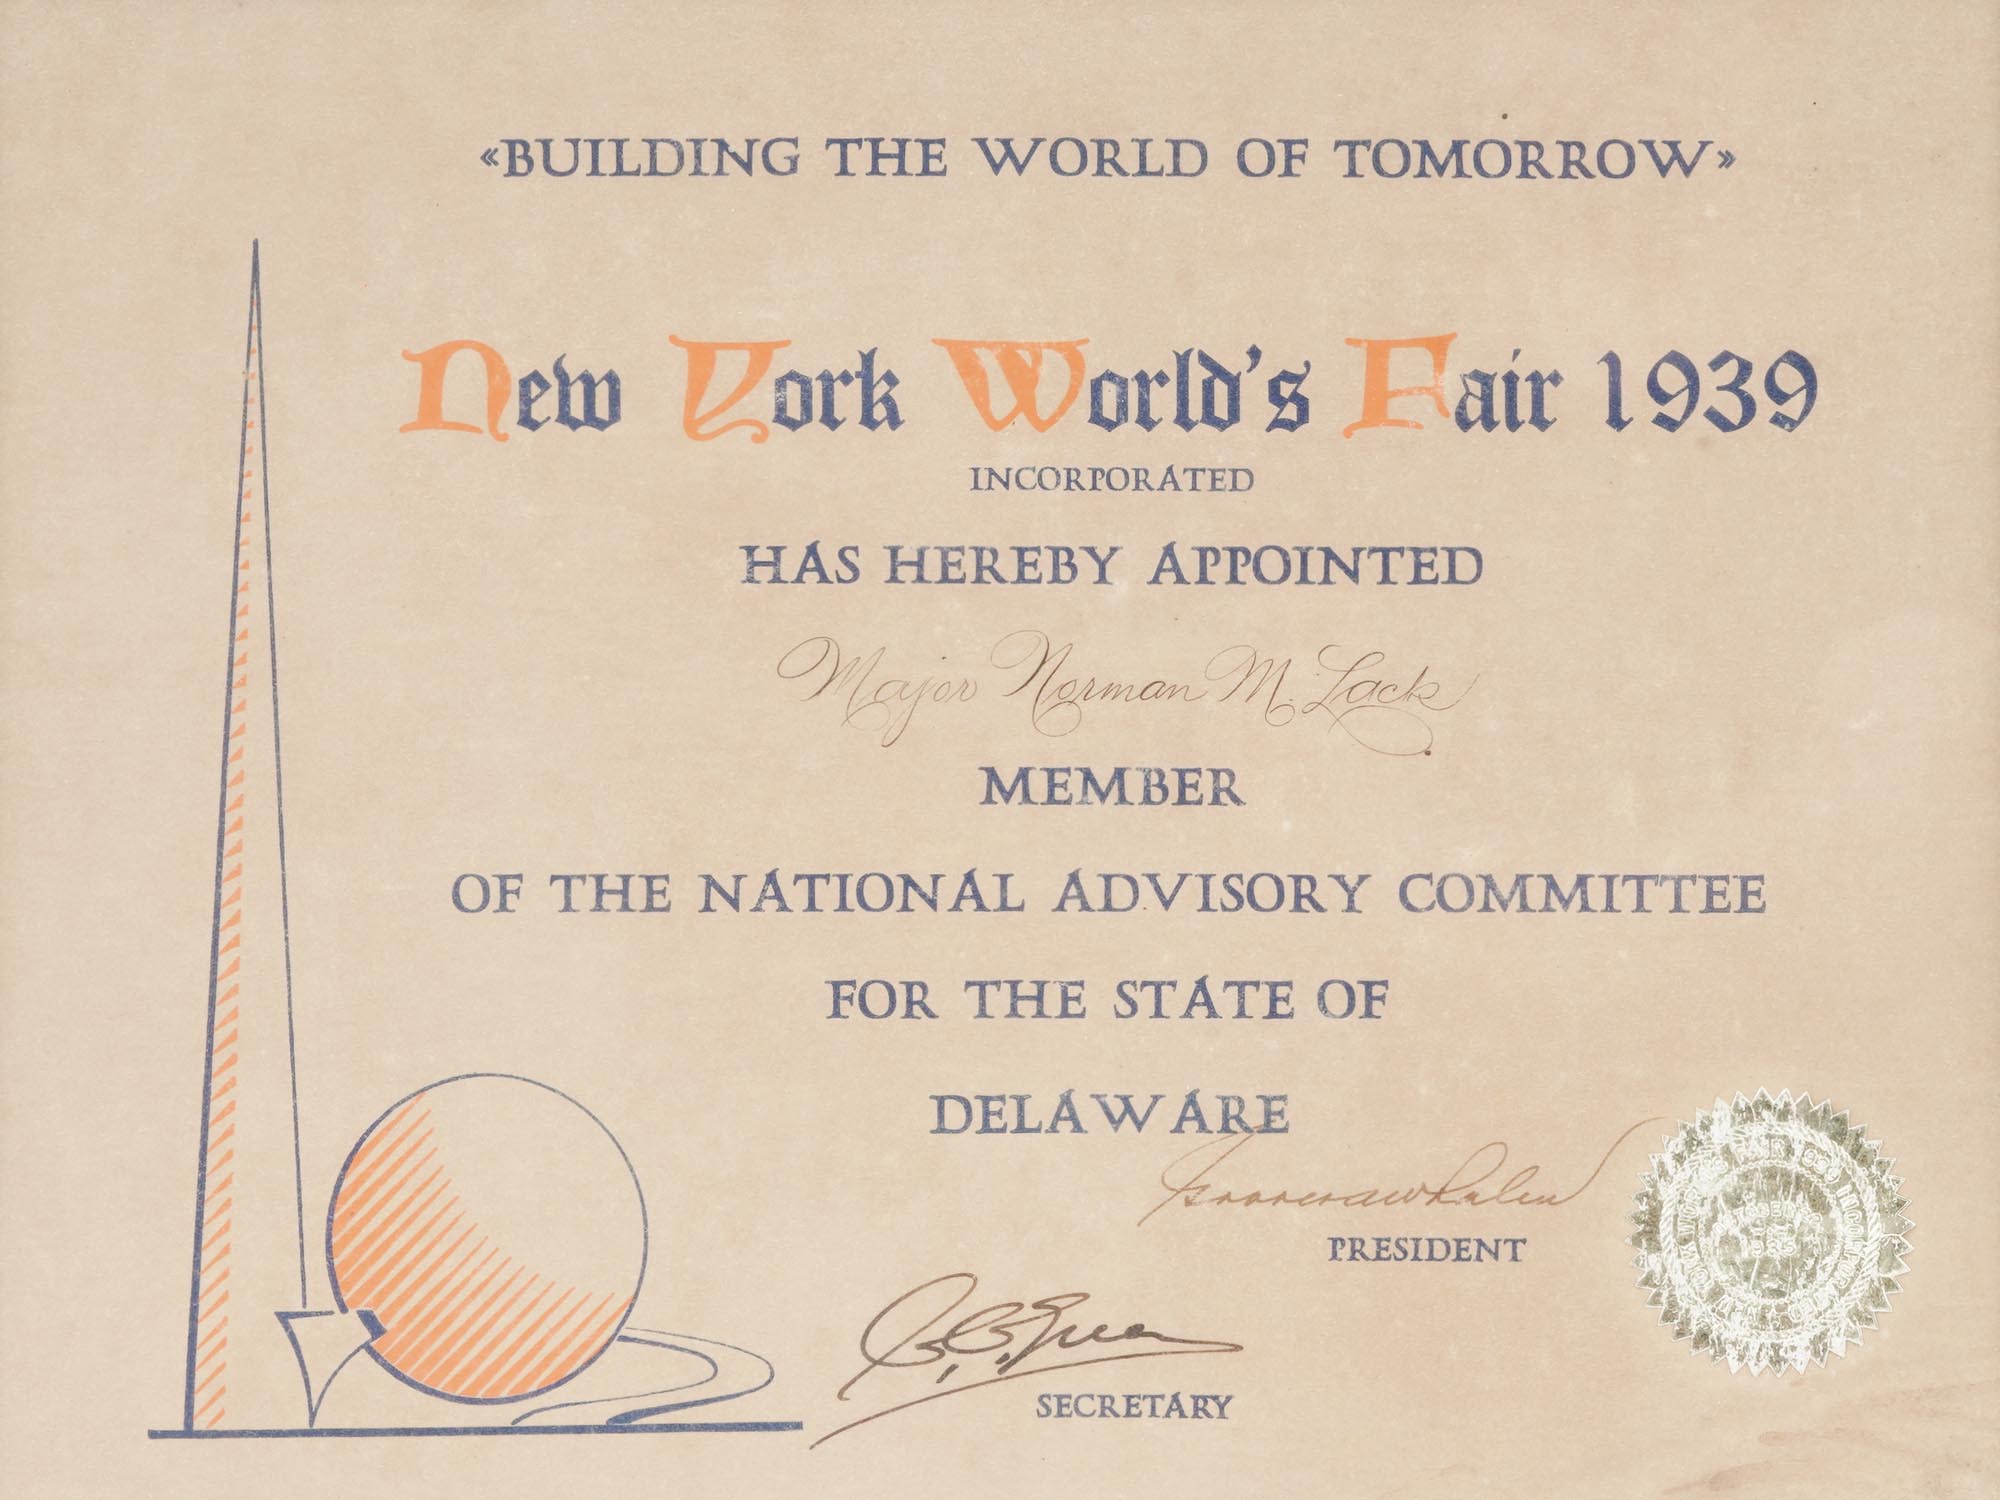 1939 NEW YORK WORLDS FAIR ADMINISTRATIVE DOCUMENT PIC-1